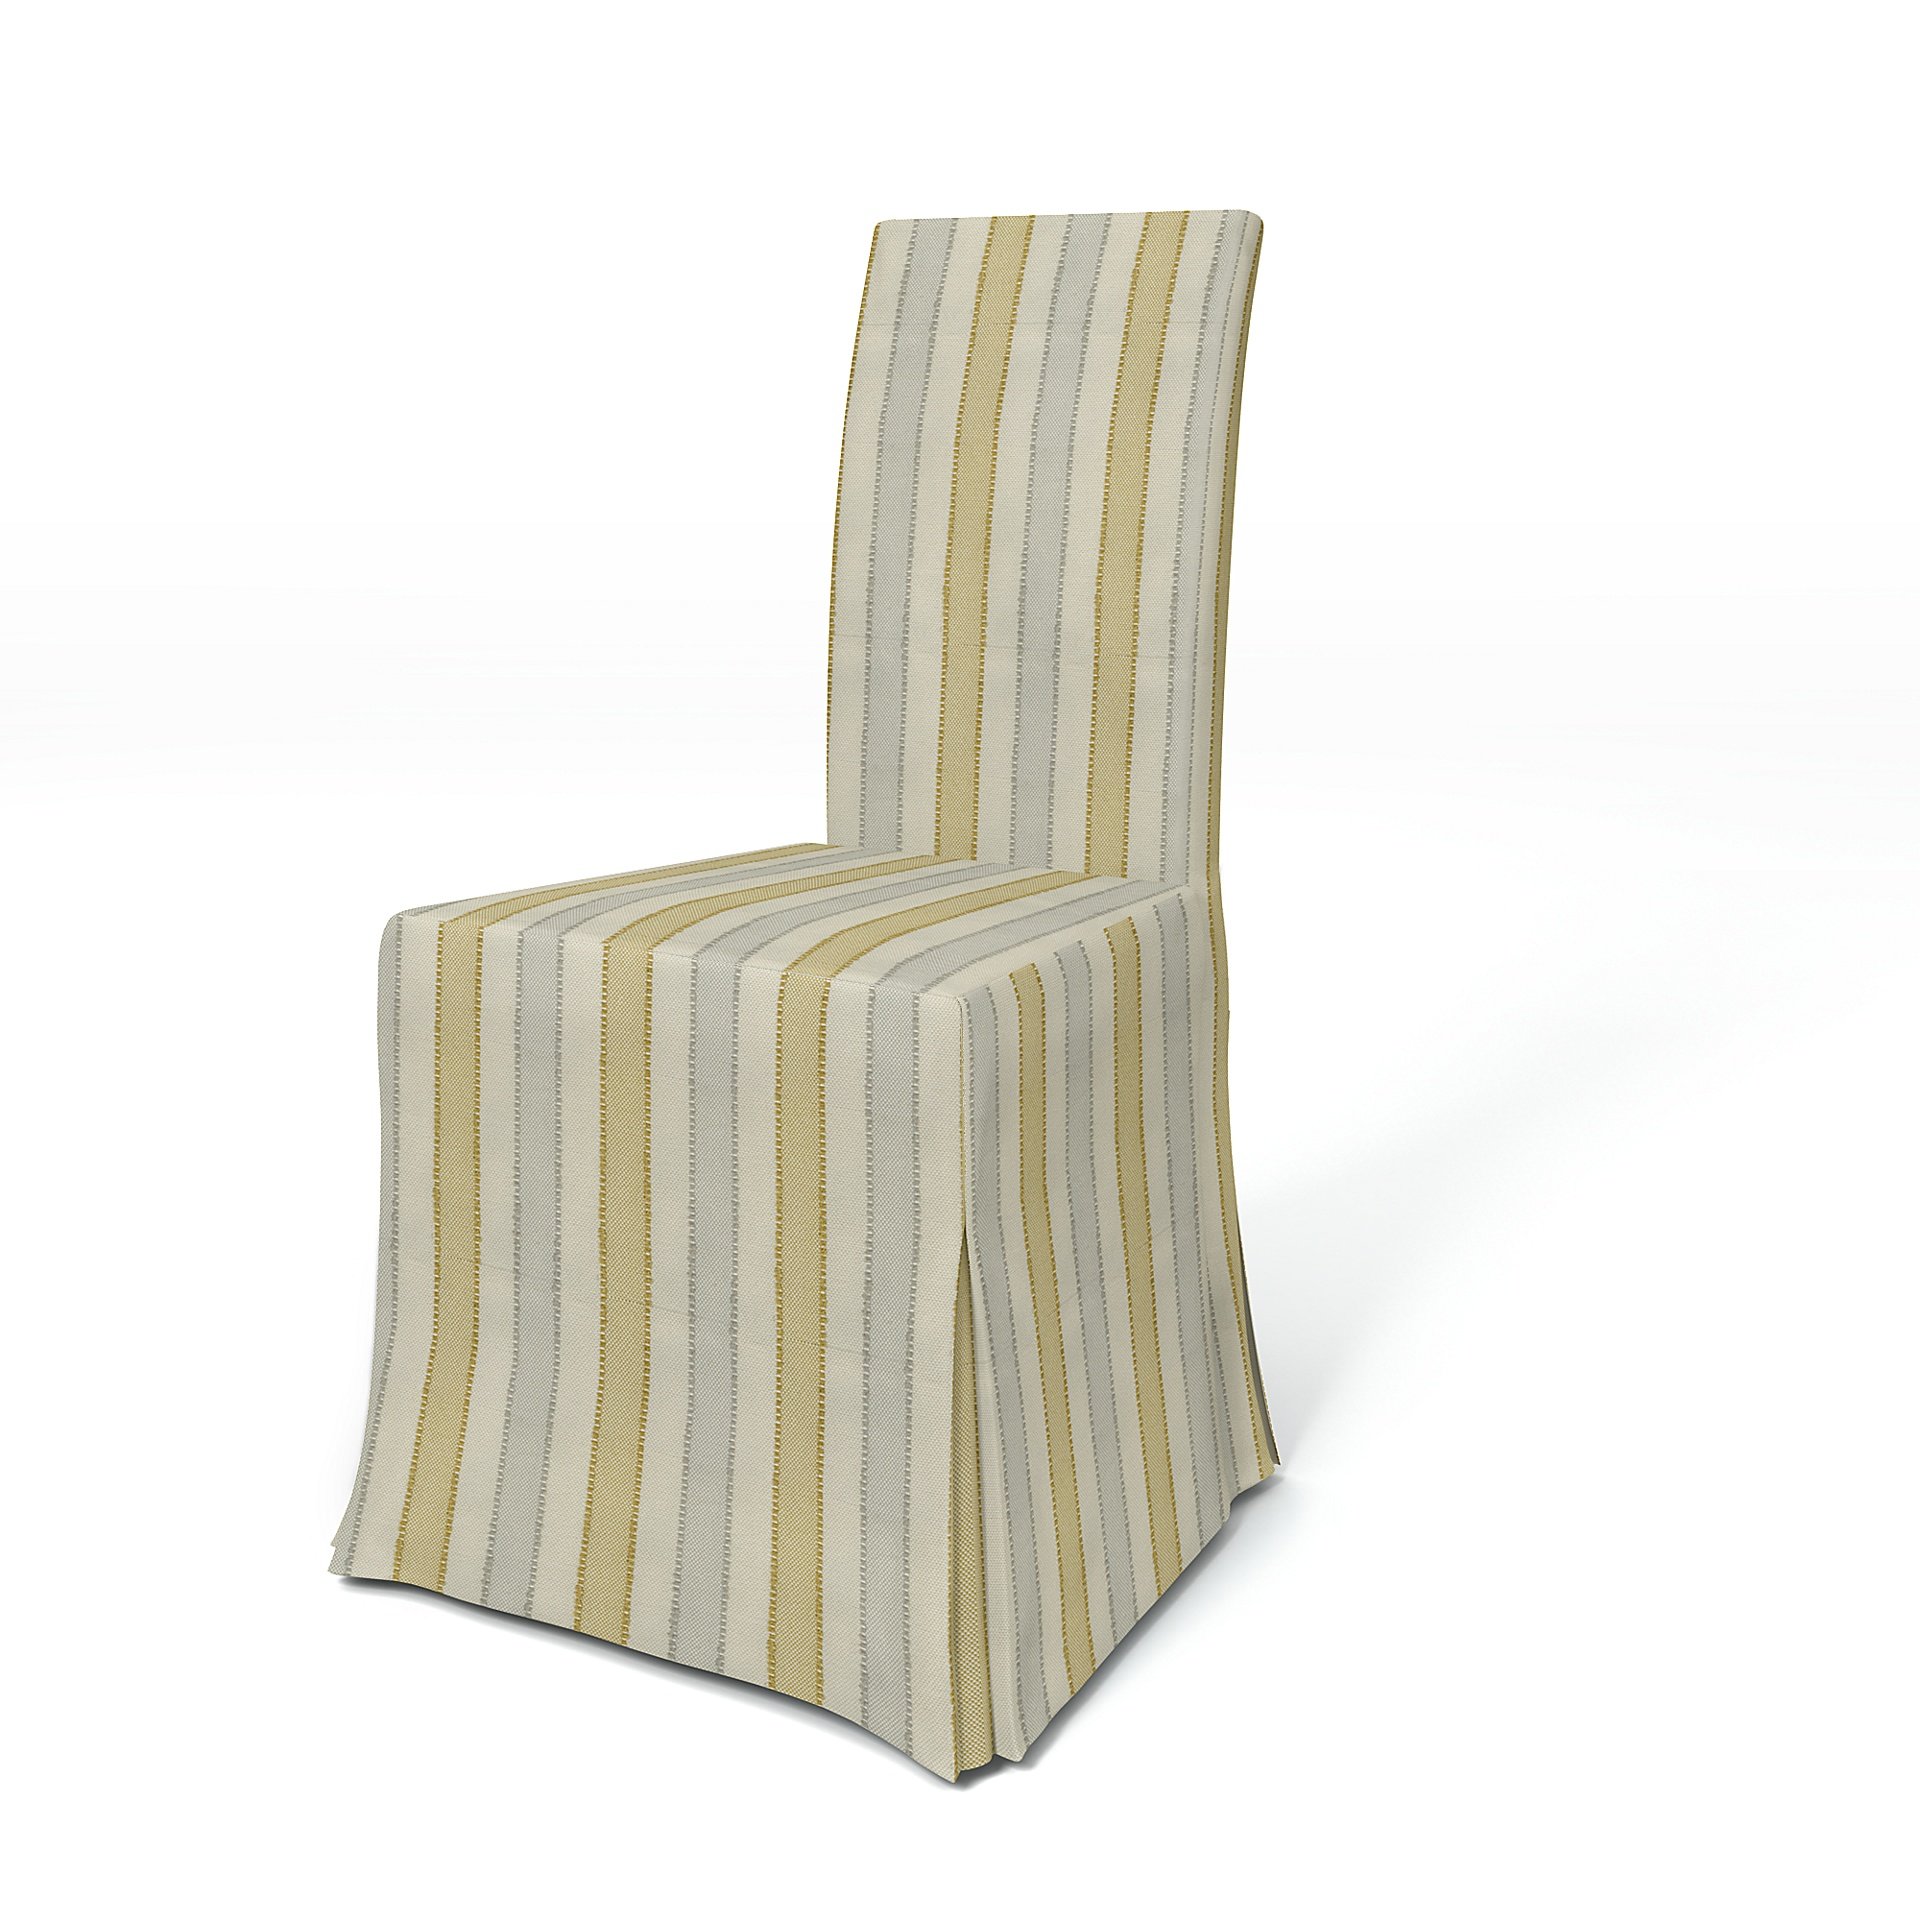 IKEA - Harry Dining Chair Cover, Sunset Yellow, Outdoor - Bemz